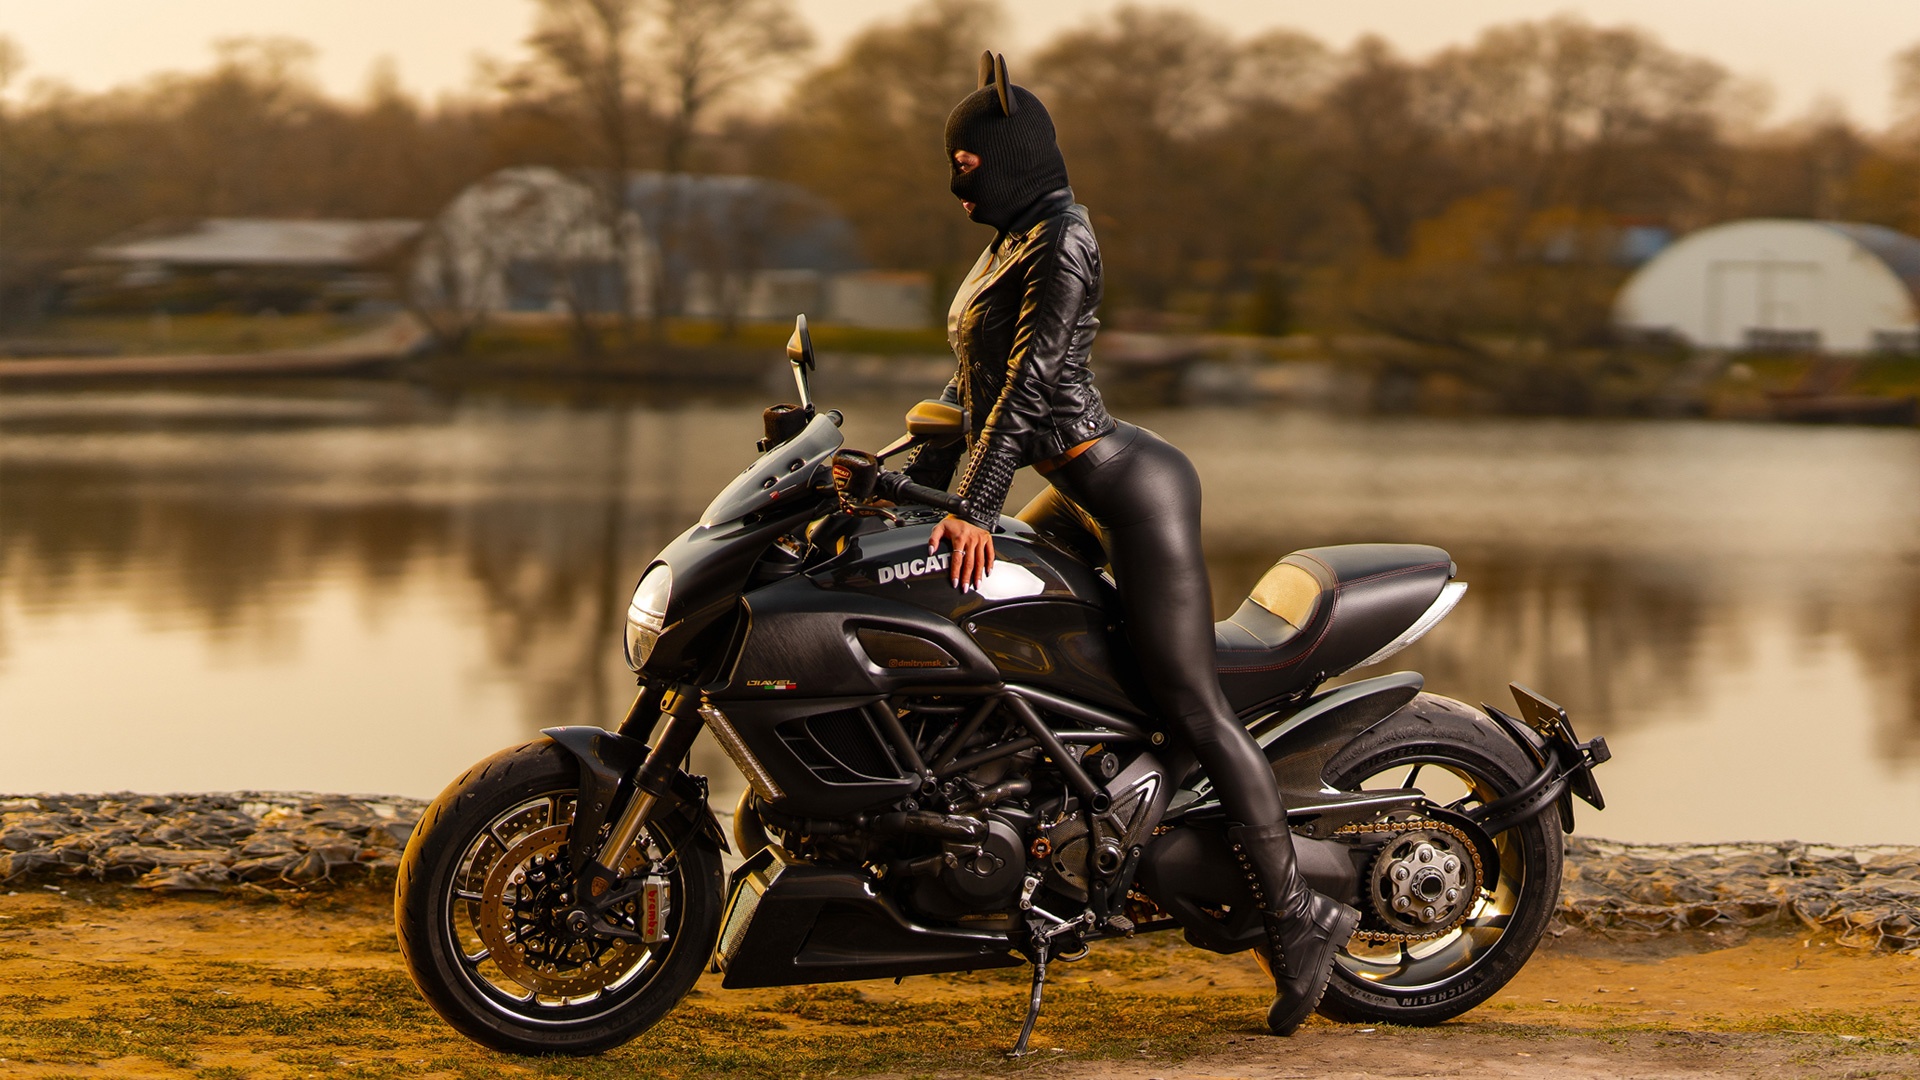 Ducati Diavel and cosplay babe